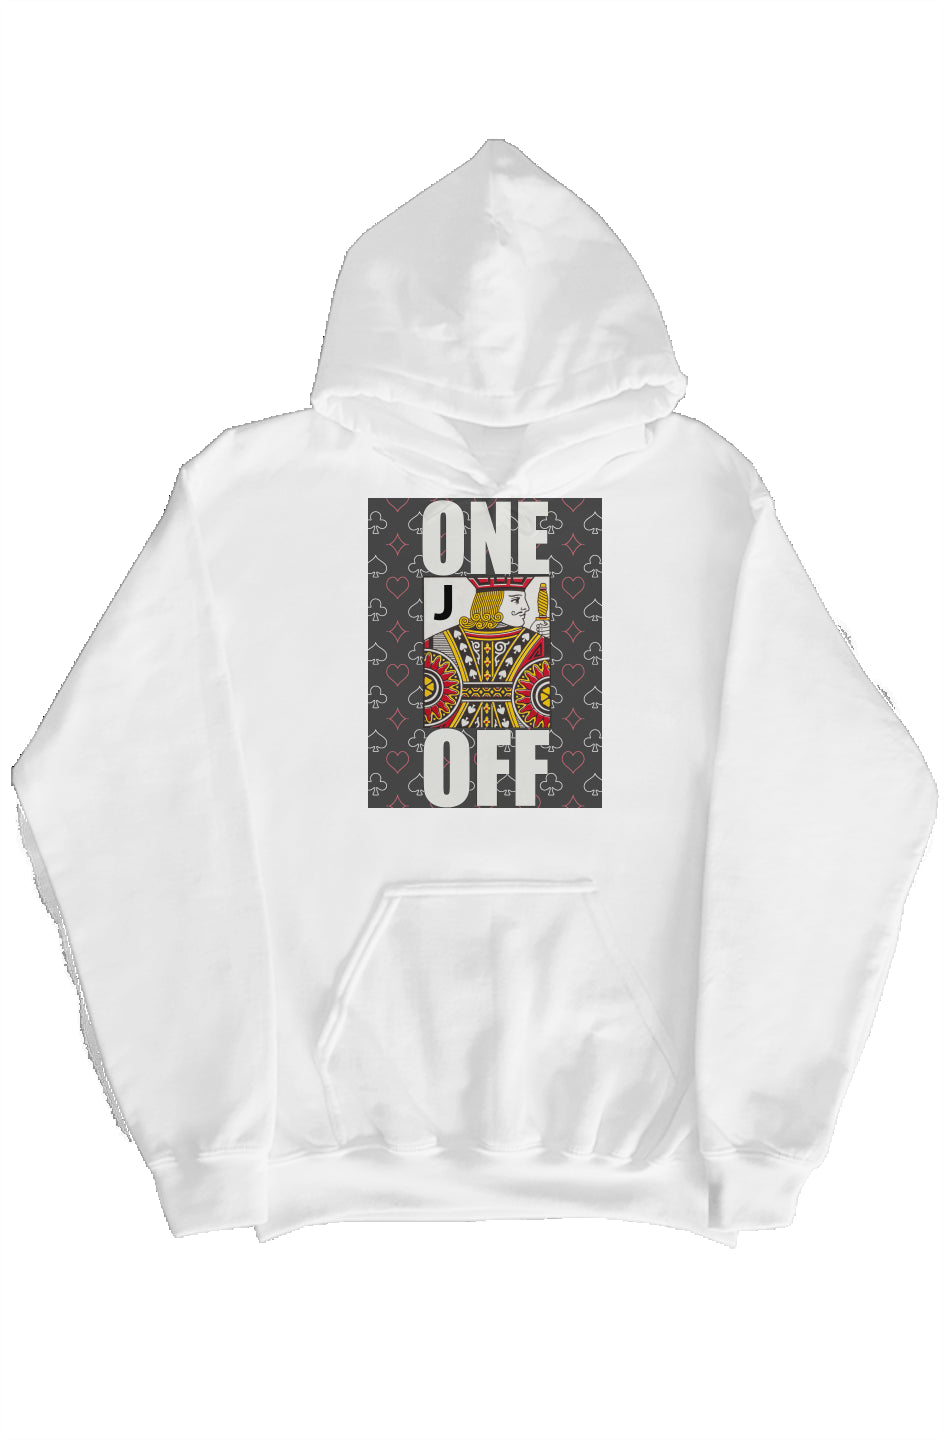 One Jack Off Pullover Hoody